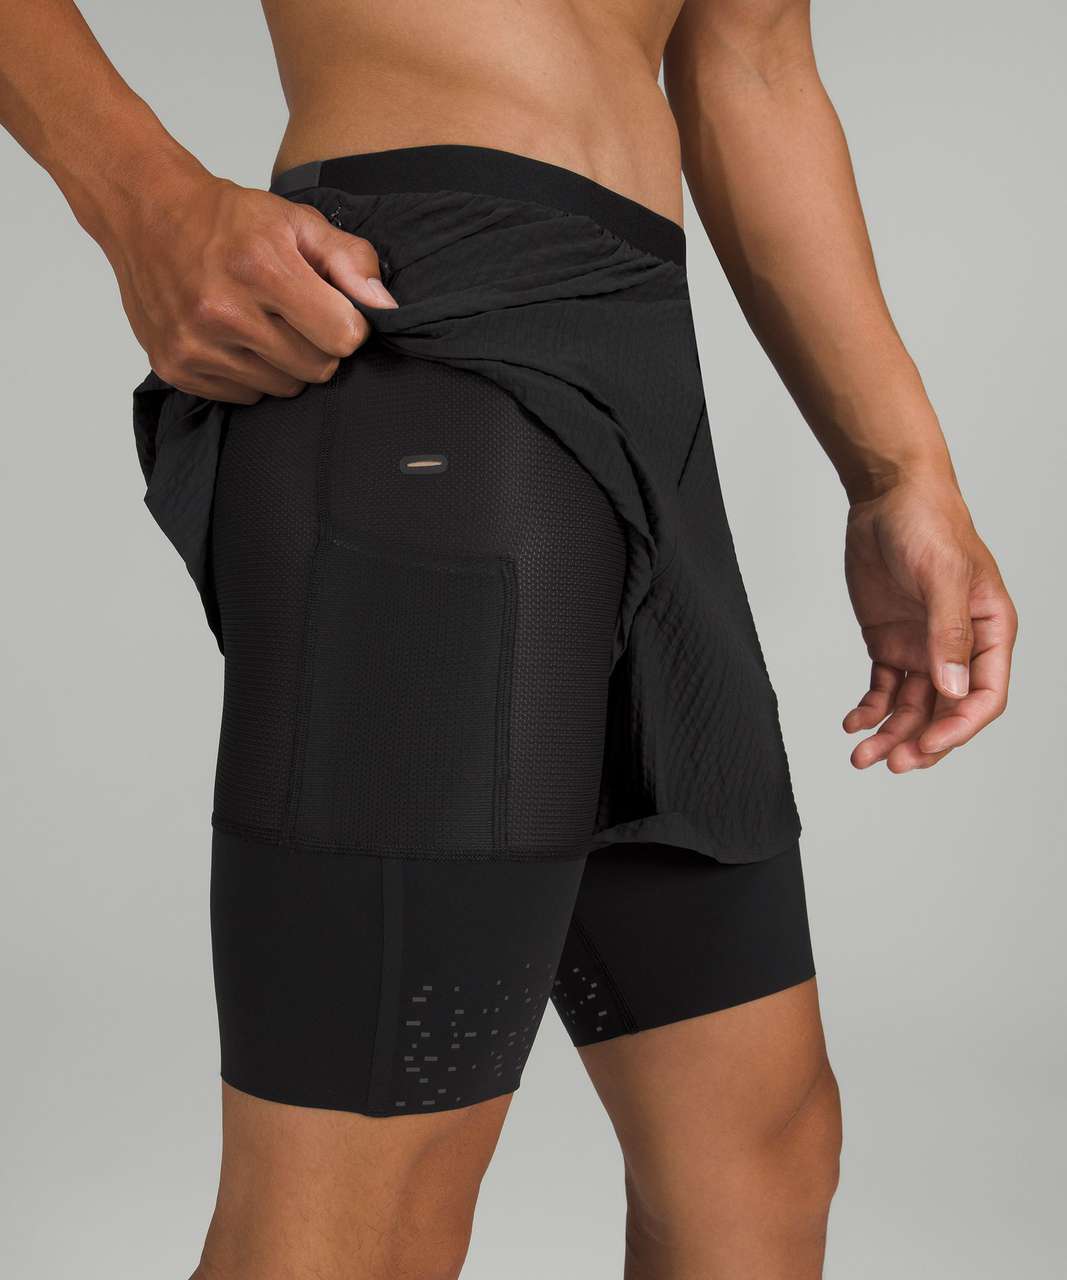 Lululemon Surge Lined Short 6" *Special Edition - Black / Inflect Textured Raw Linen Multi